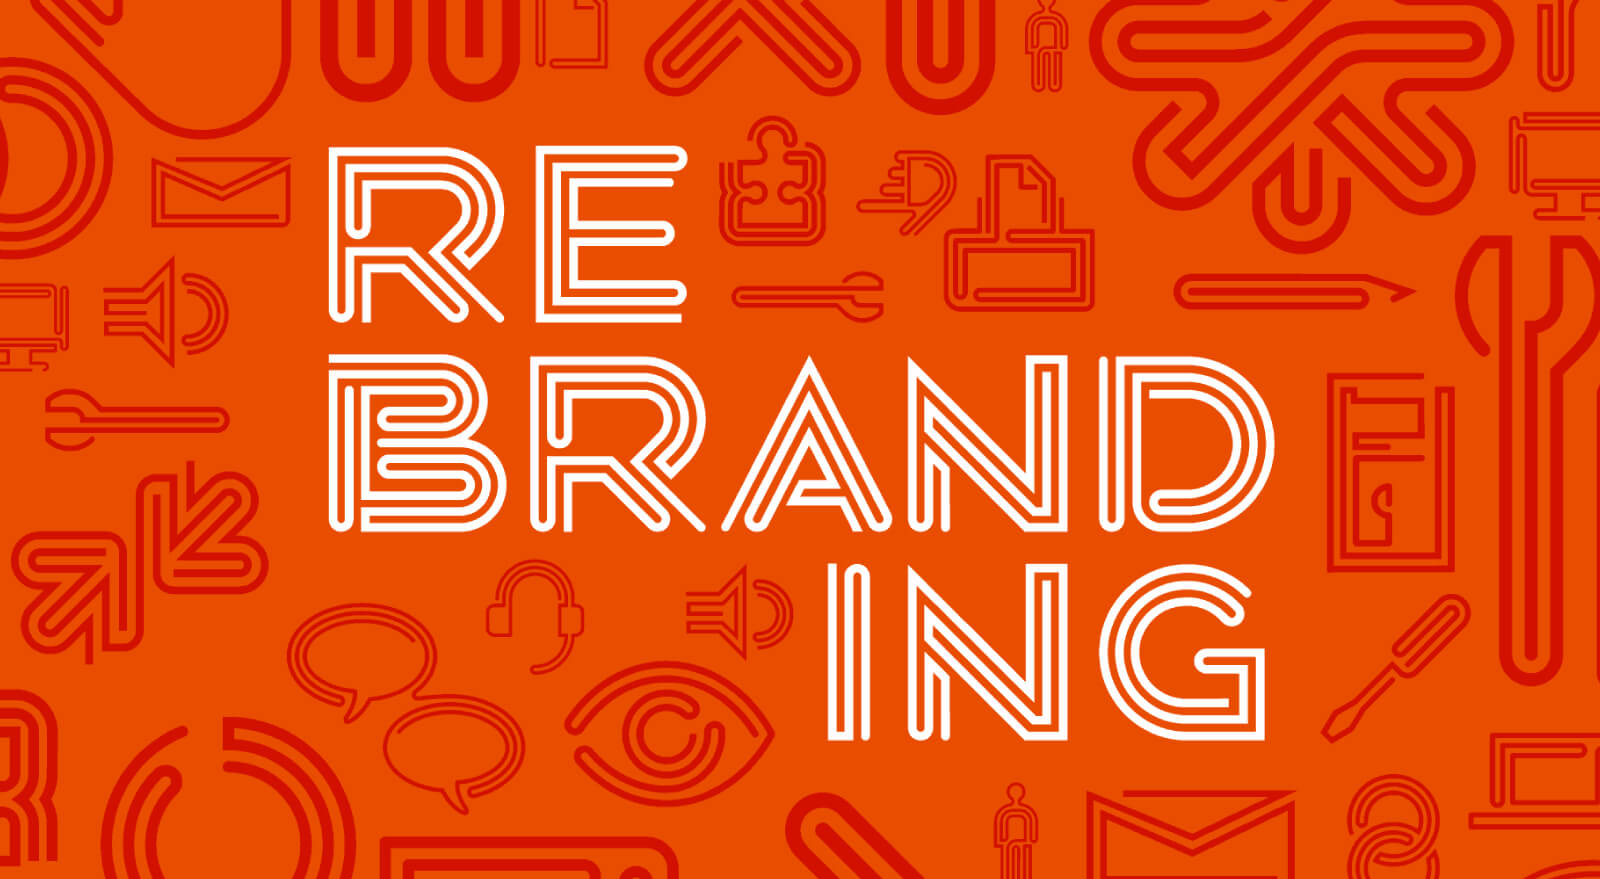 How To Prepare For A Business Rebrand